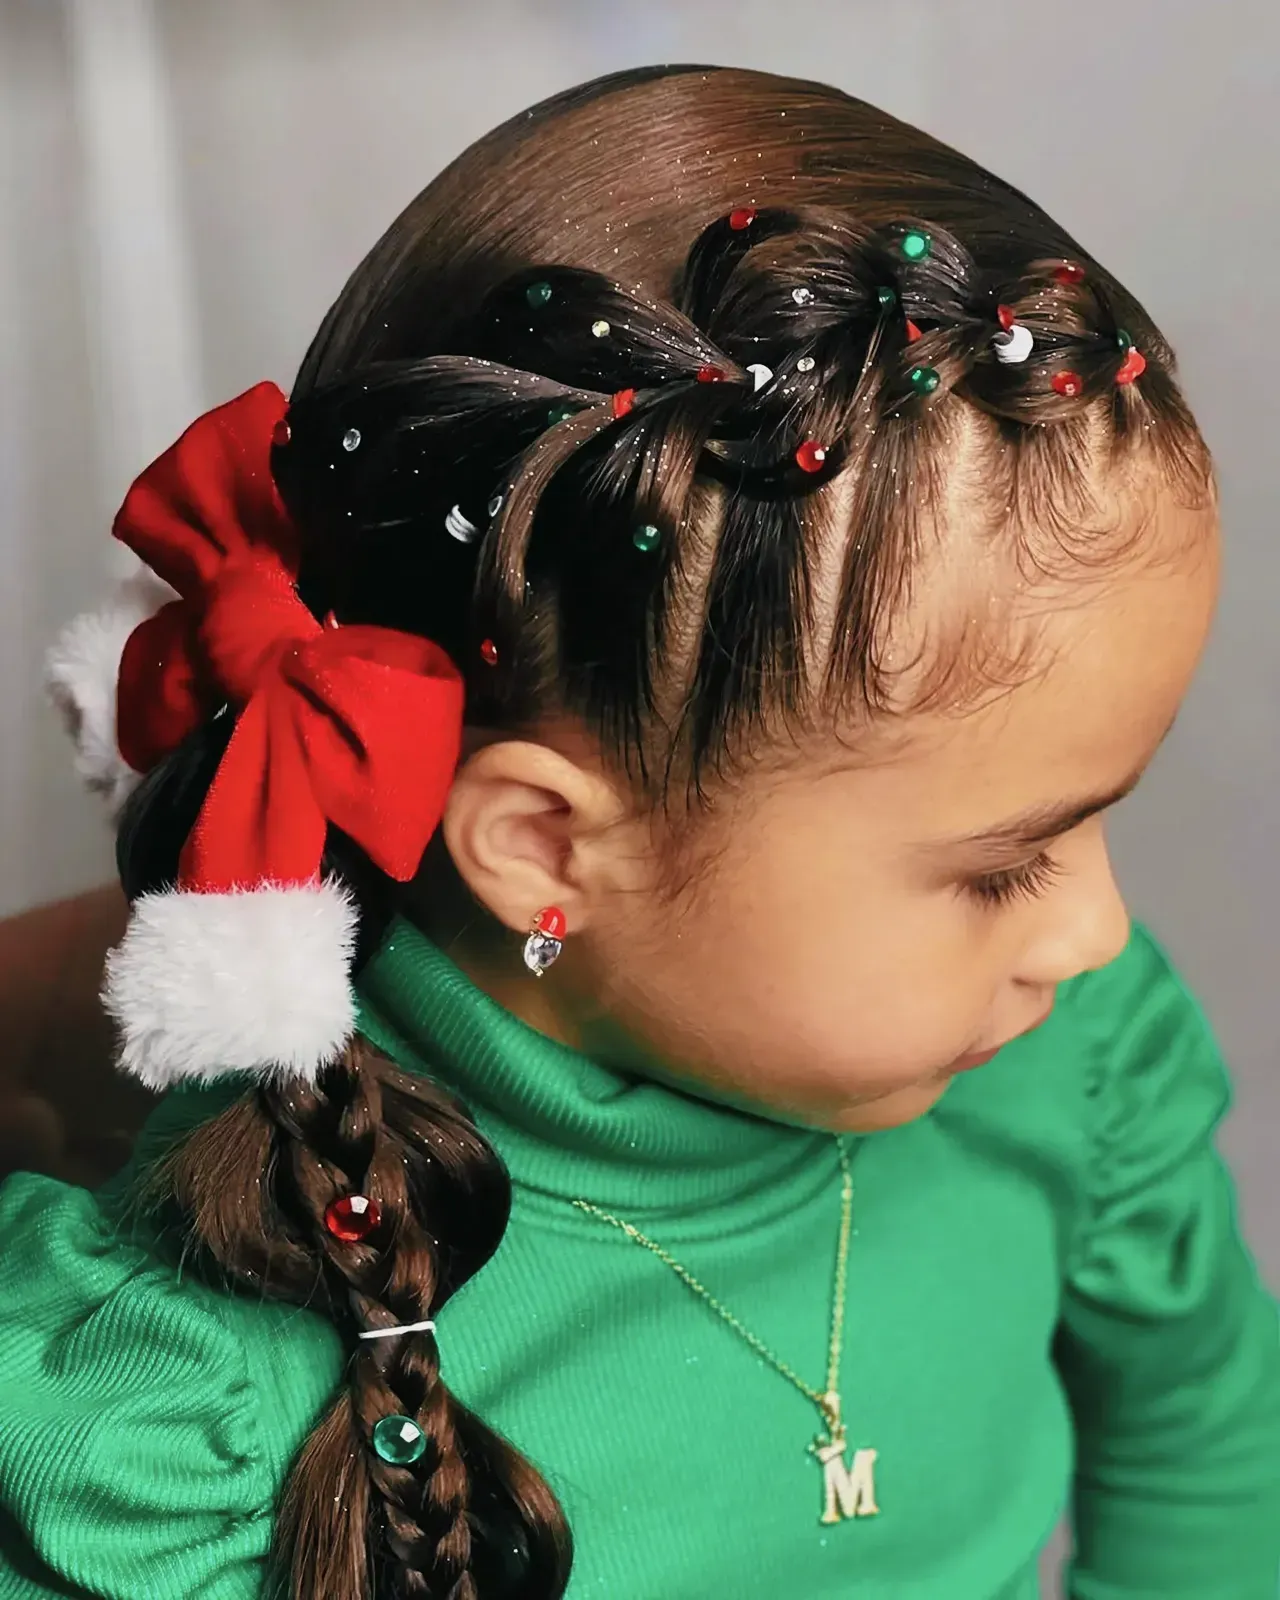 Young girl with beautiful Christmas hairstyle adorned with a red bow and colorful beads.